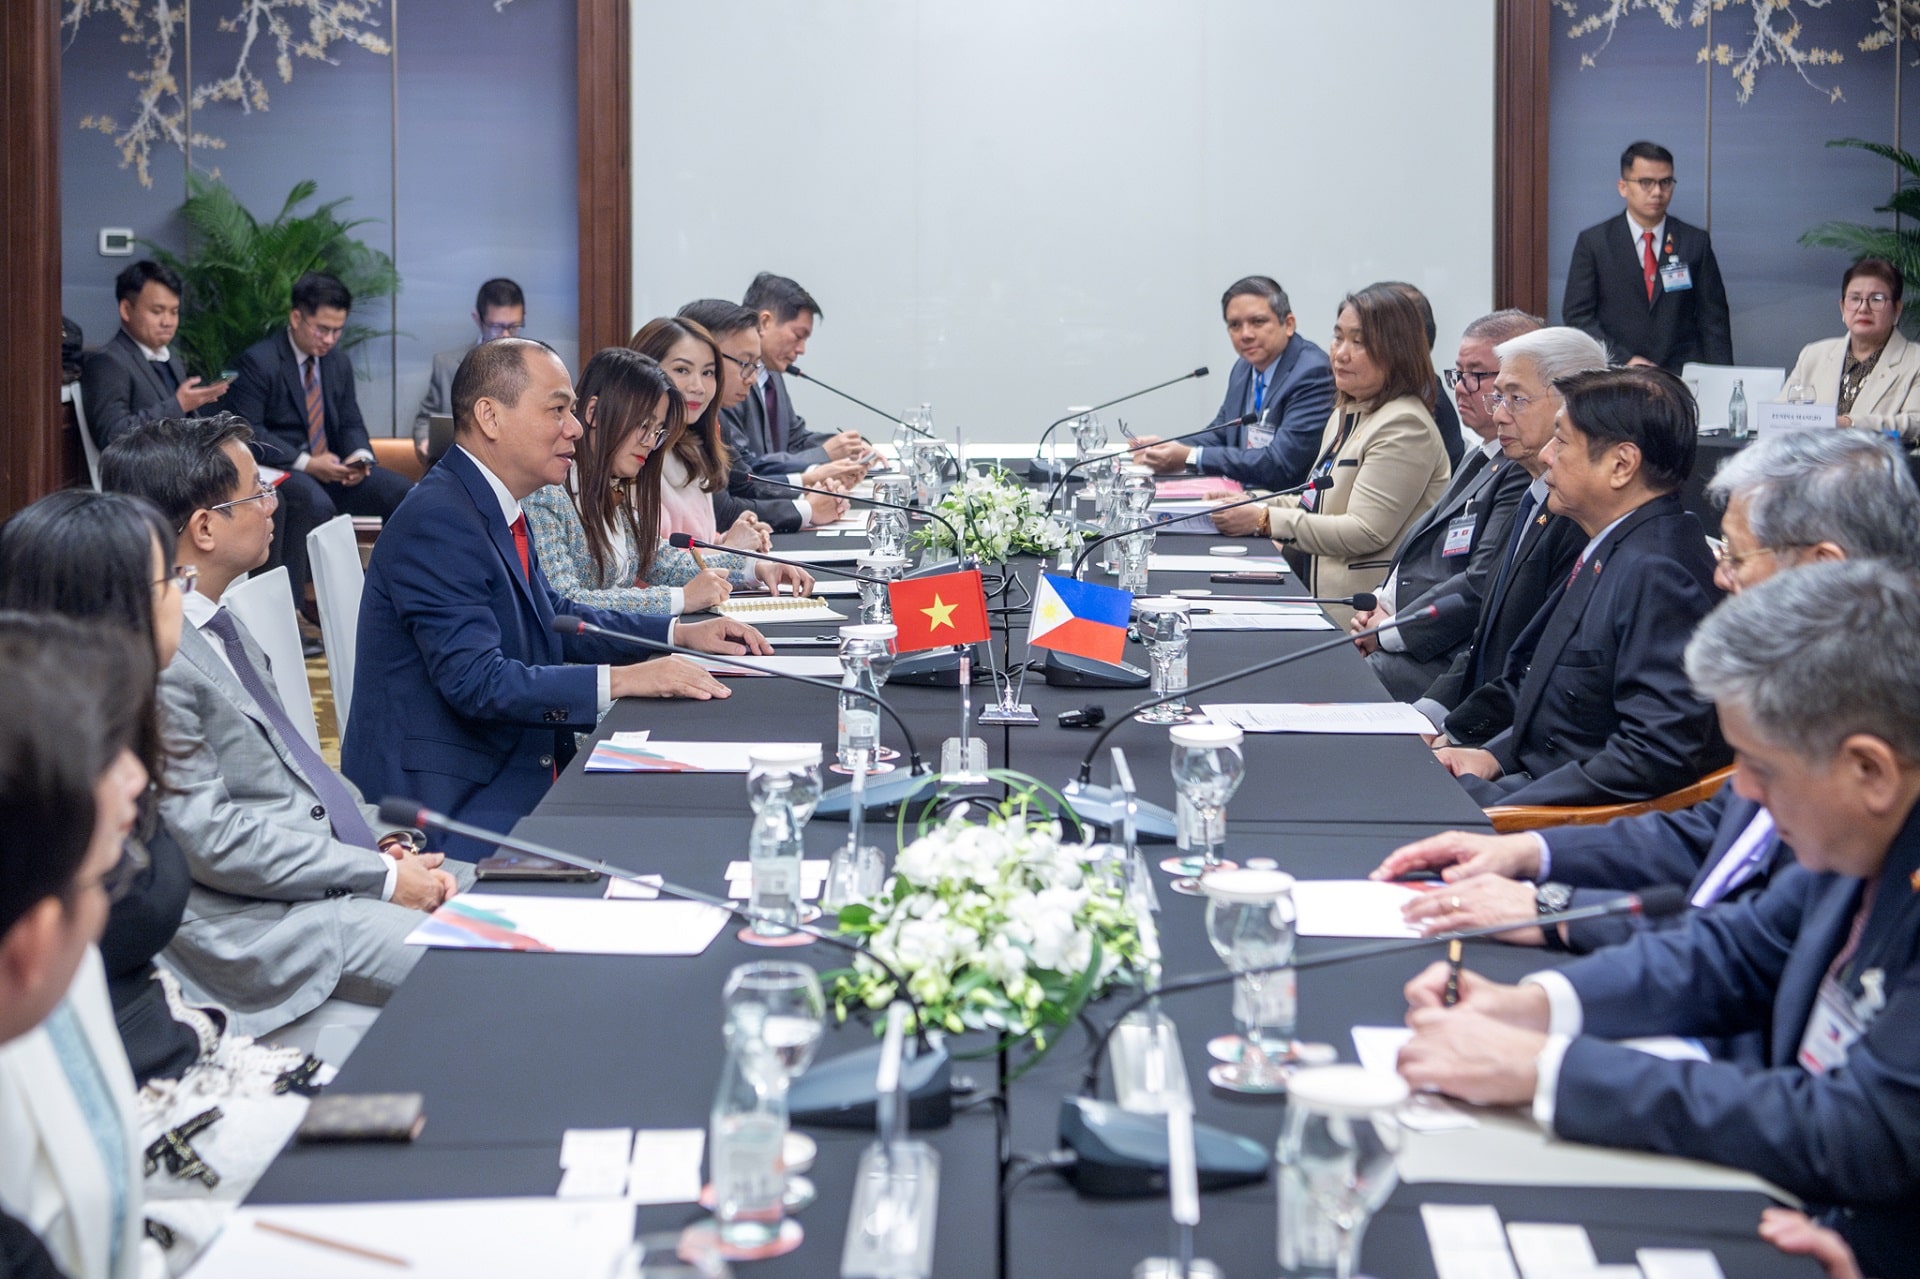 President Of The Philippines Holds A Meeting With Vingroup Chairman In Hanoi